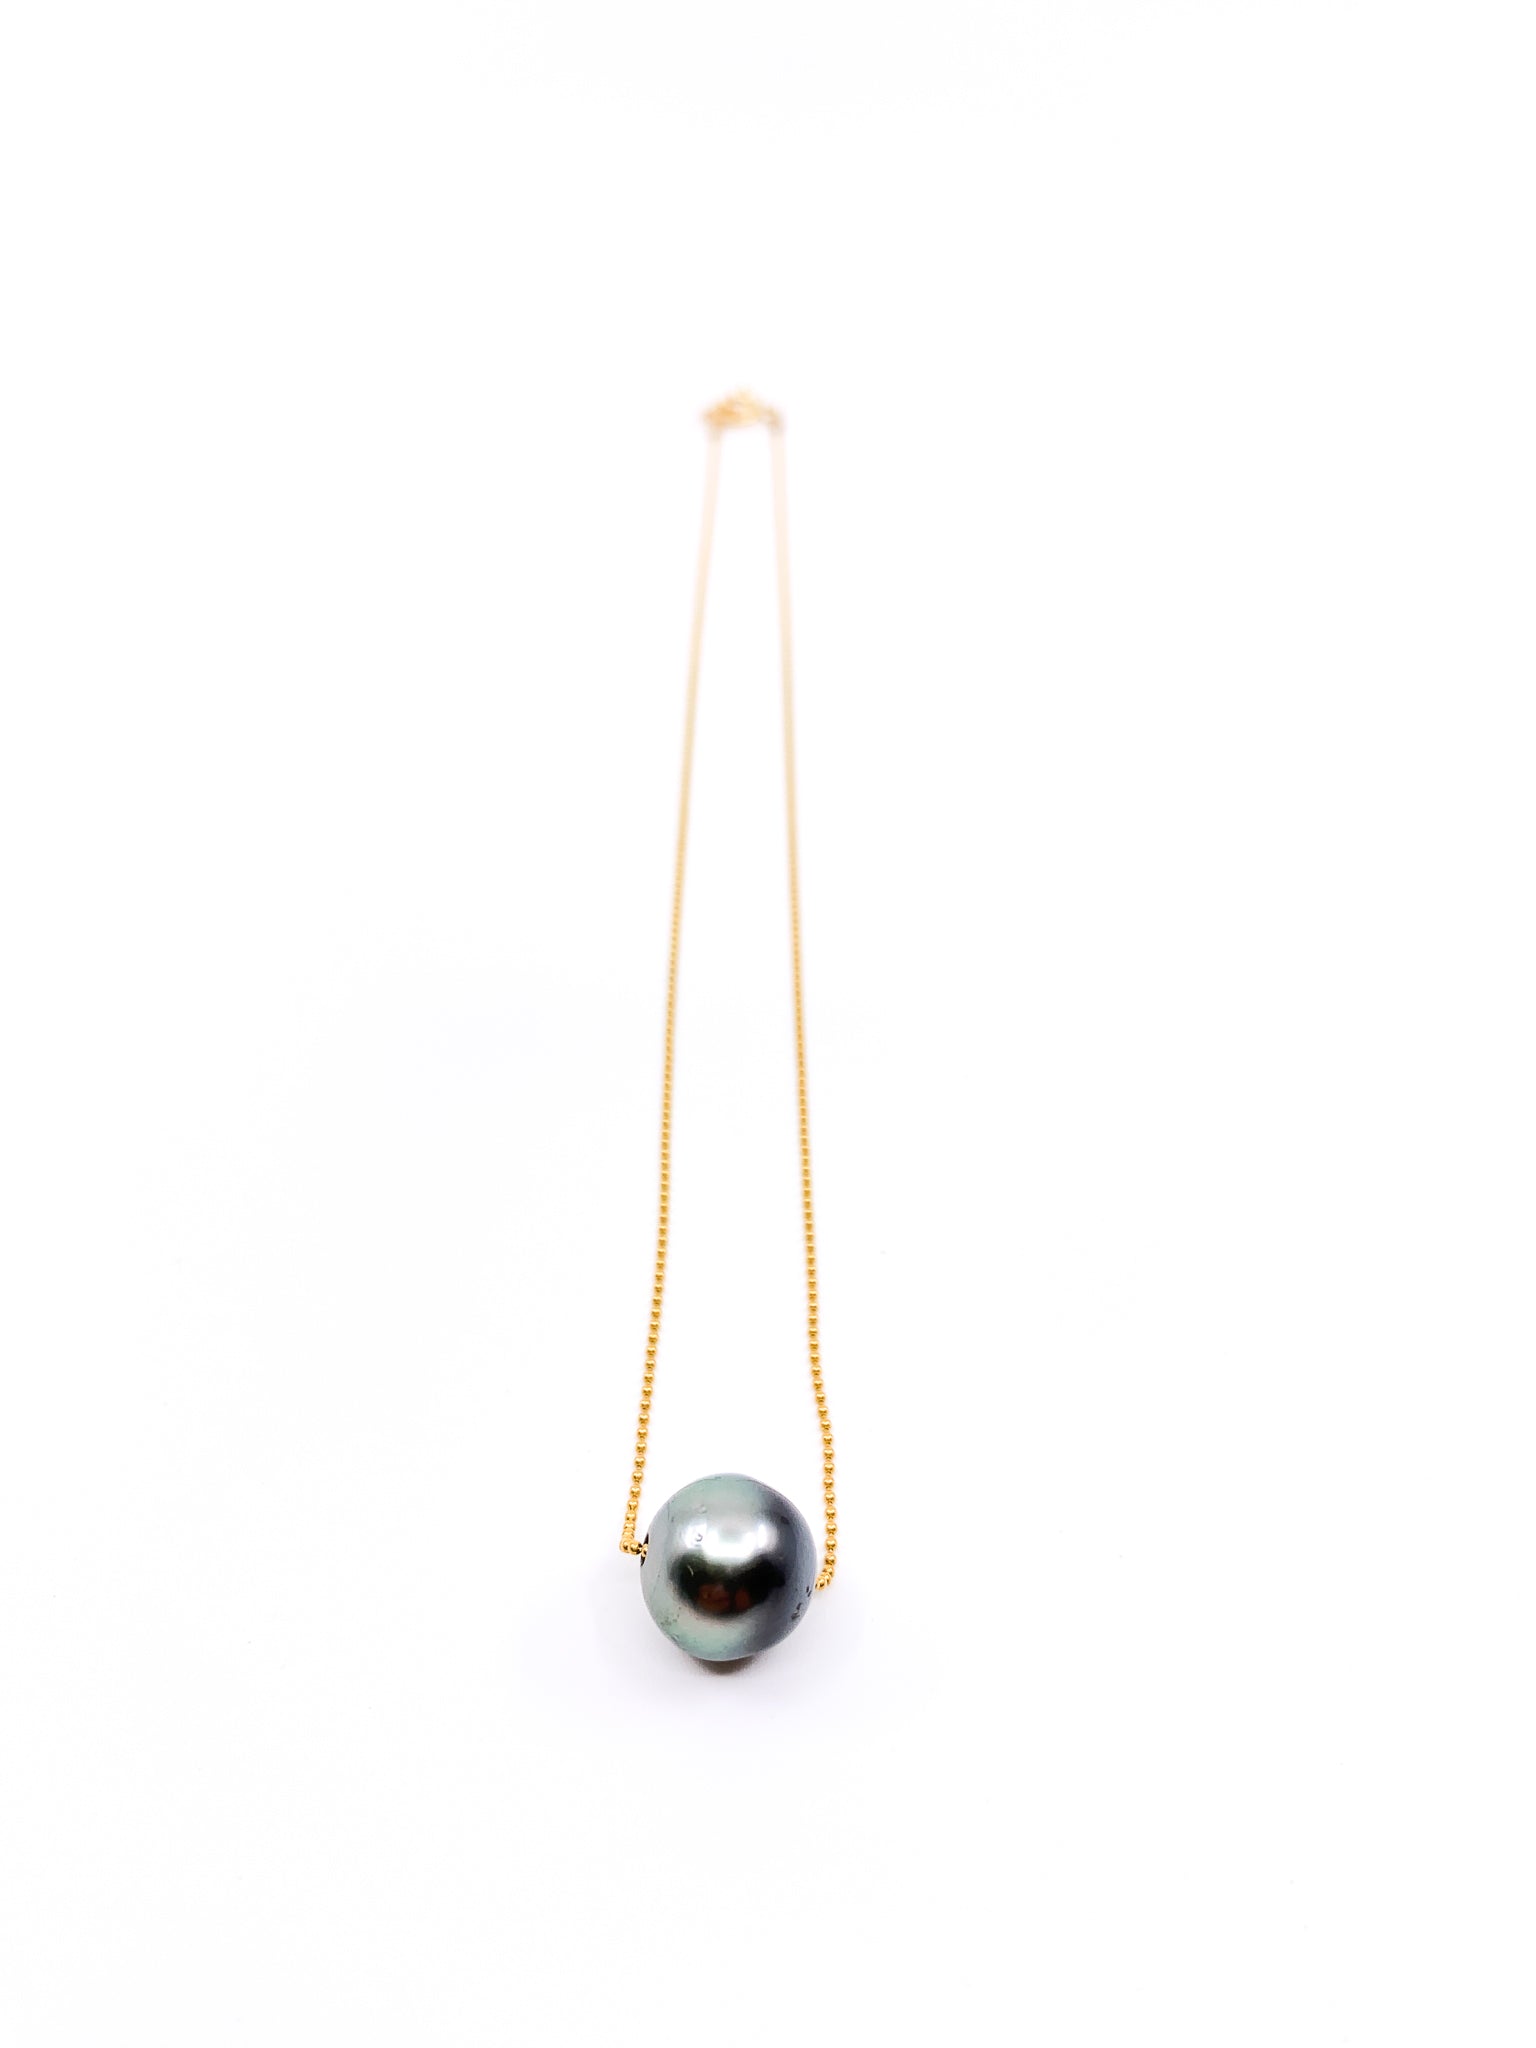 Tahitian pearl delicate gold chain necklace by eve black jewelry made in Hawaii